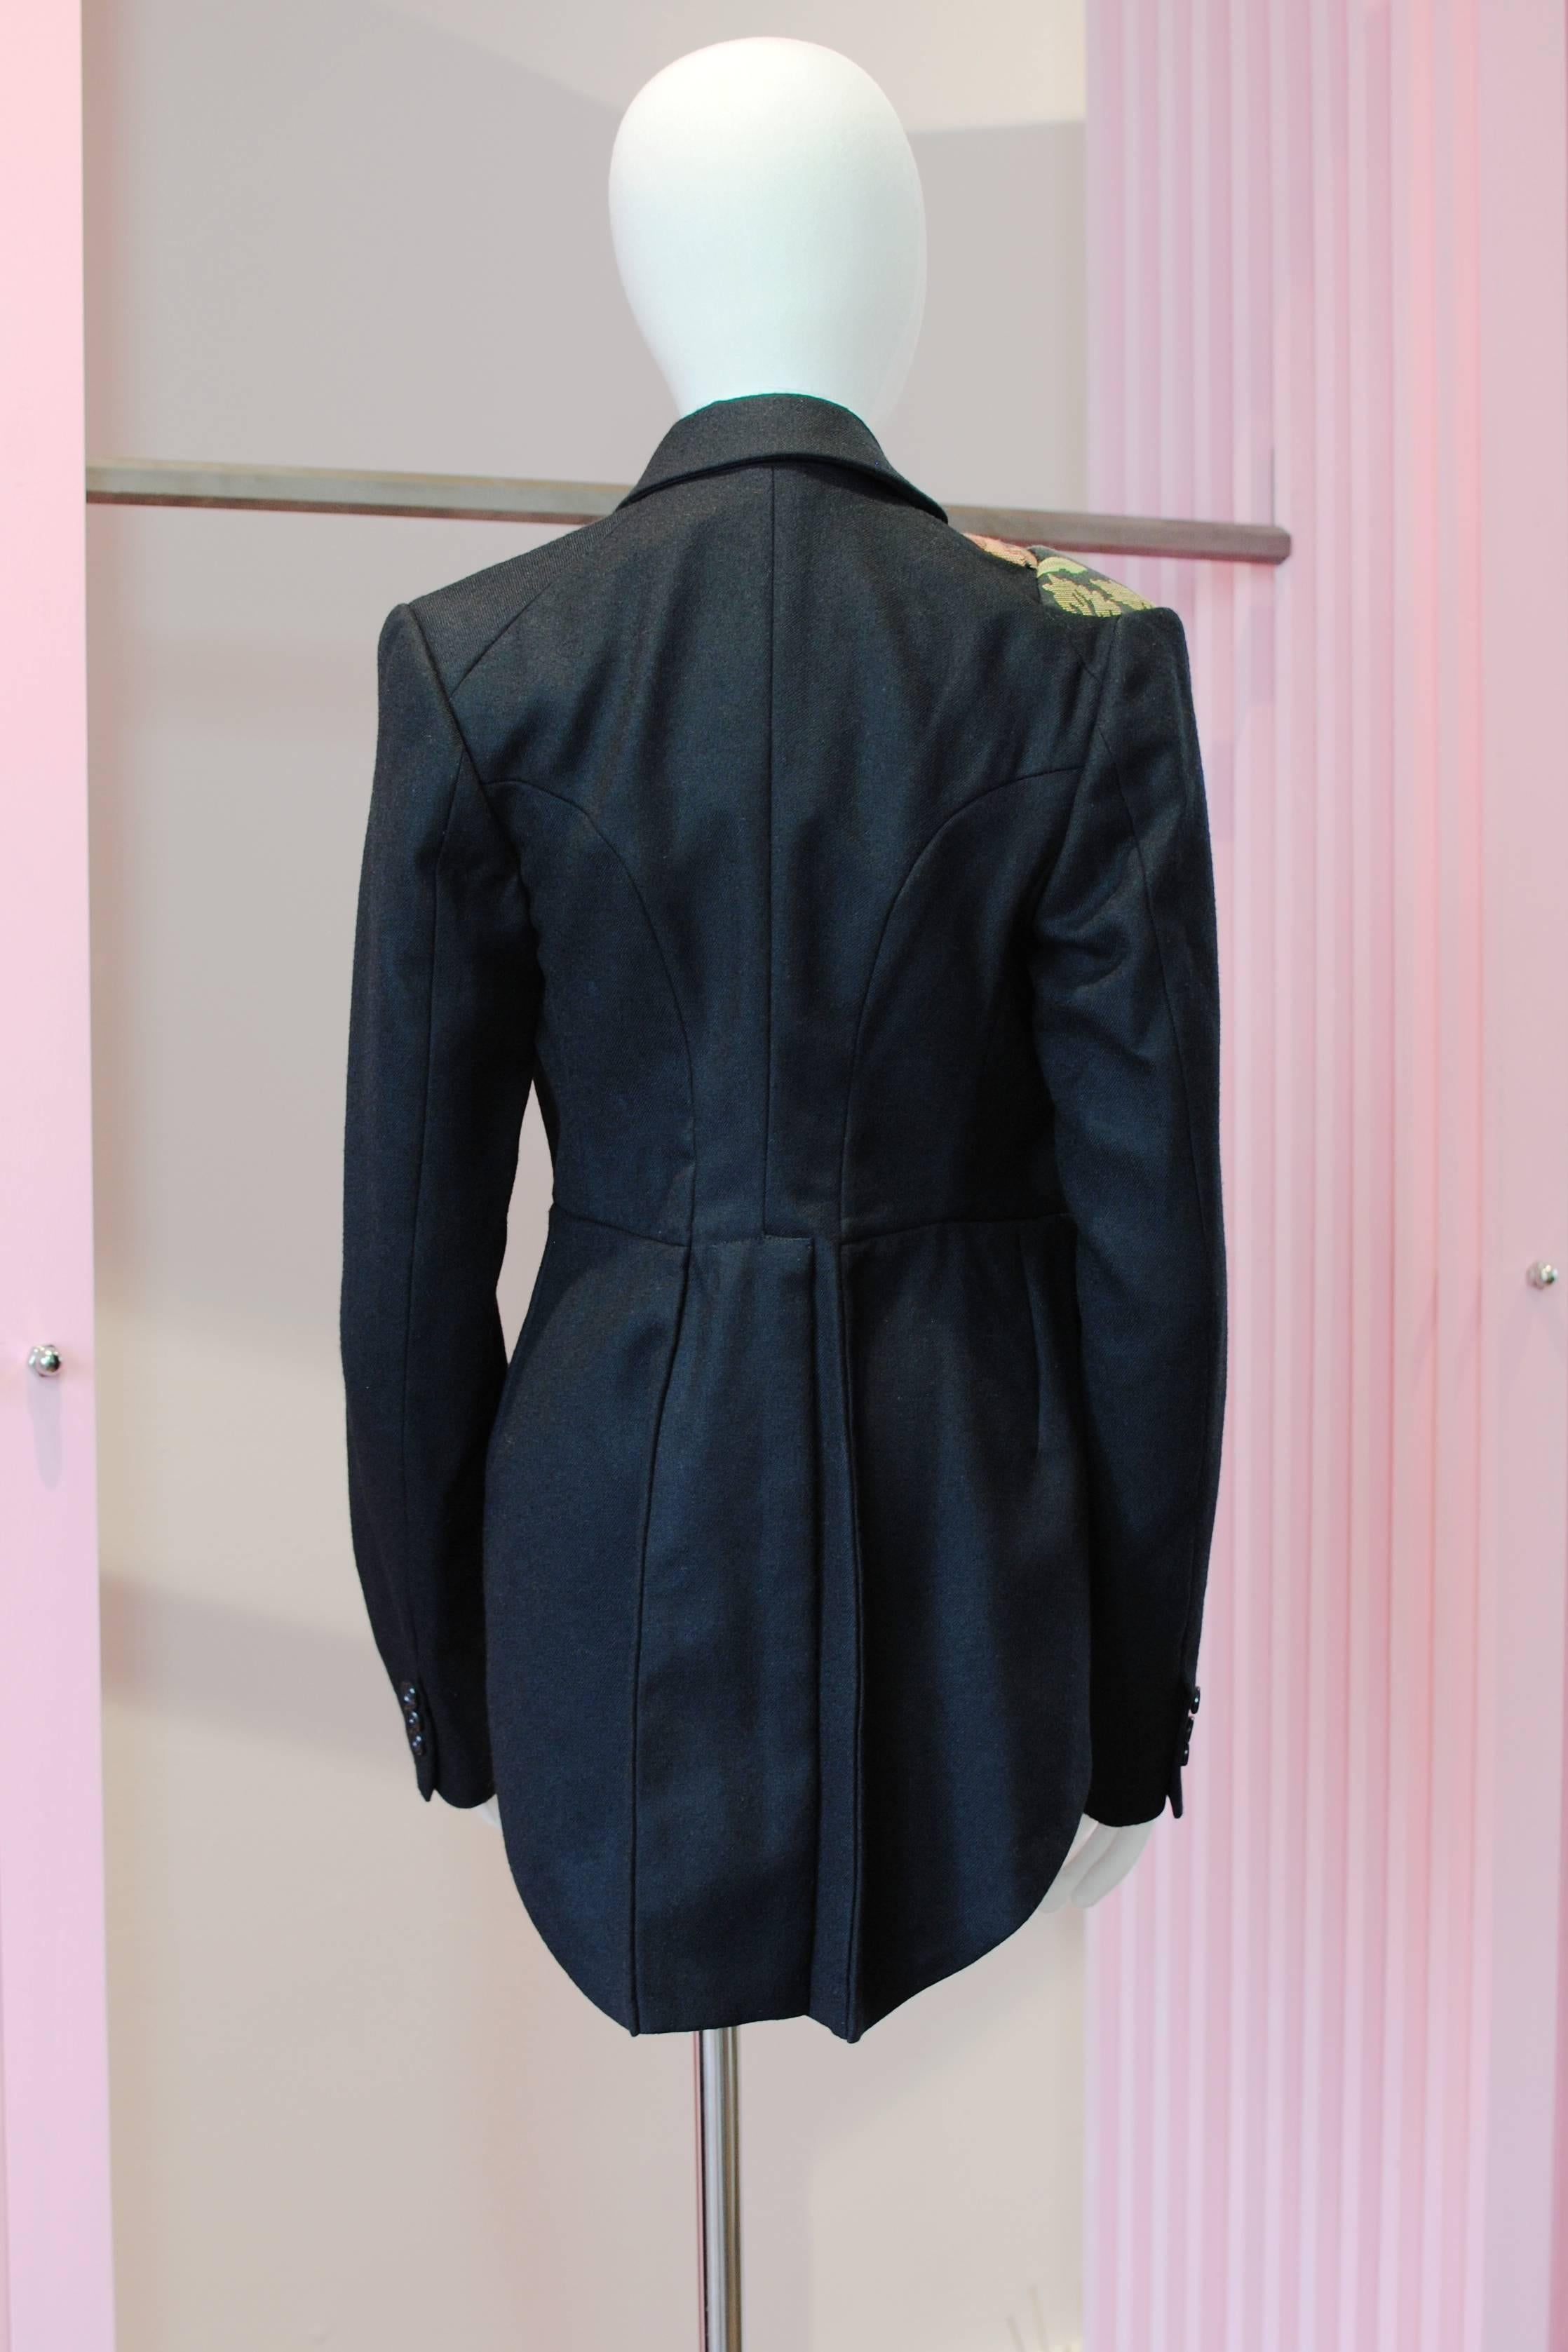 2010 COMME des GARÇONS tailcoat with attached panels In Excellent Condition For Sale In Melbourne, Victoria